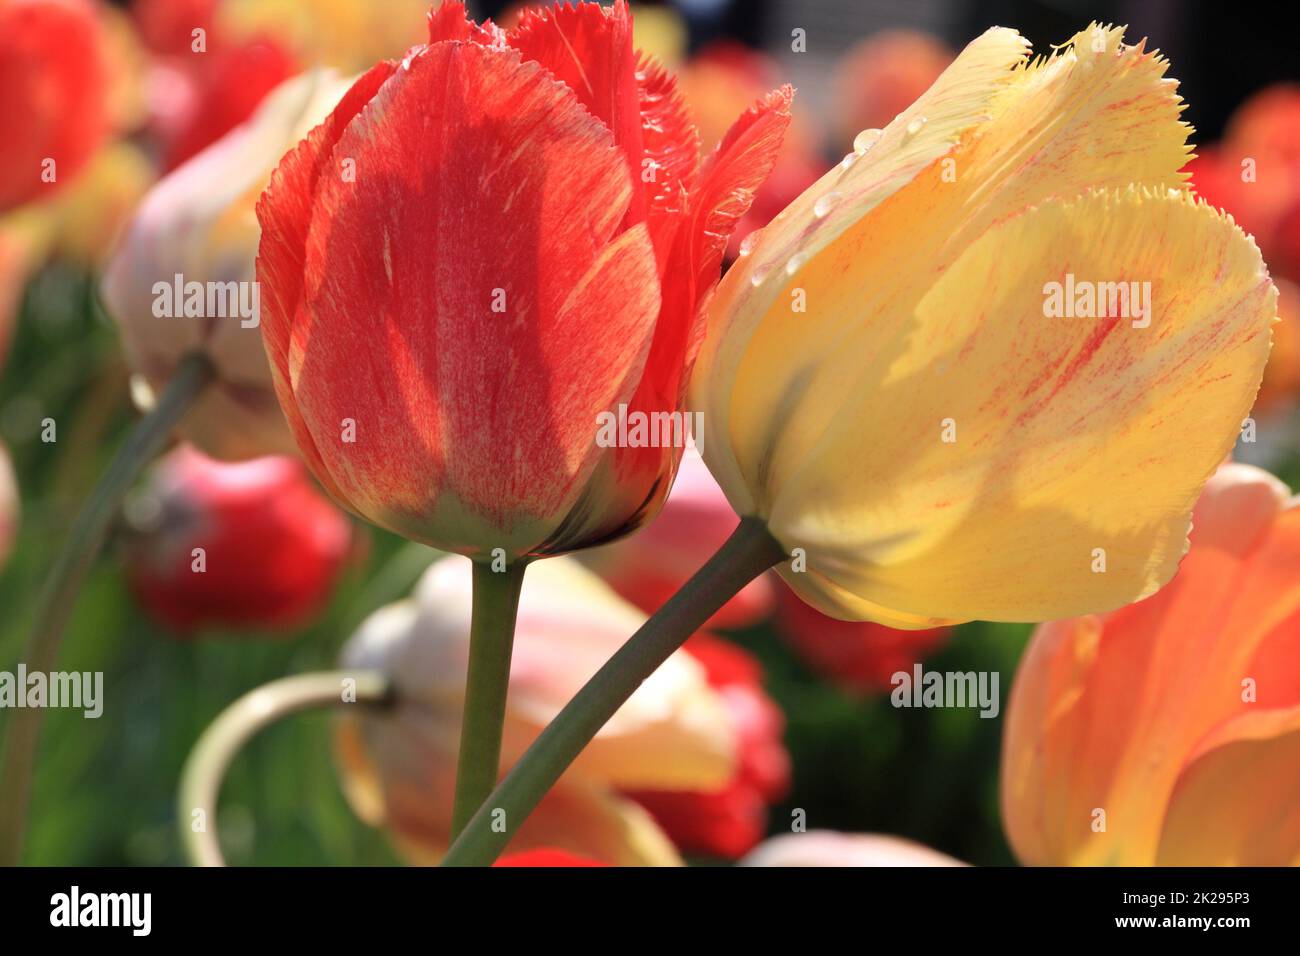 Red and yellow tulips Stock Photo